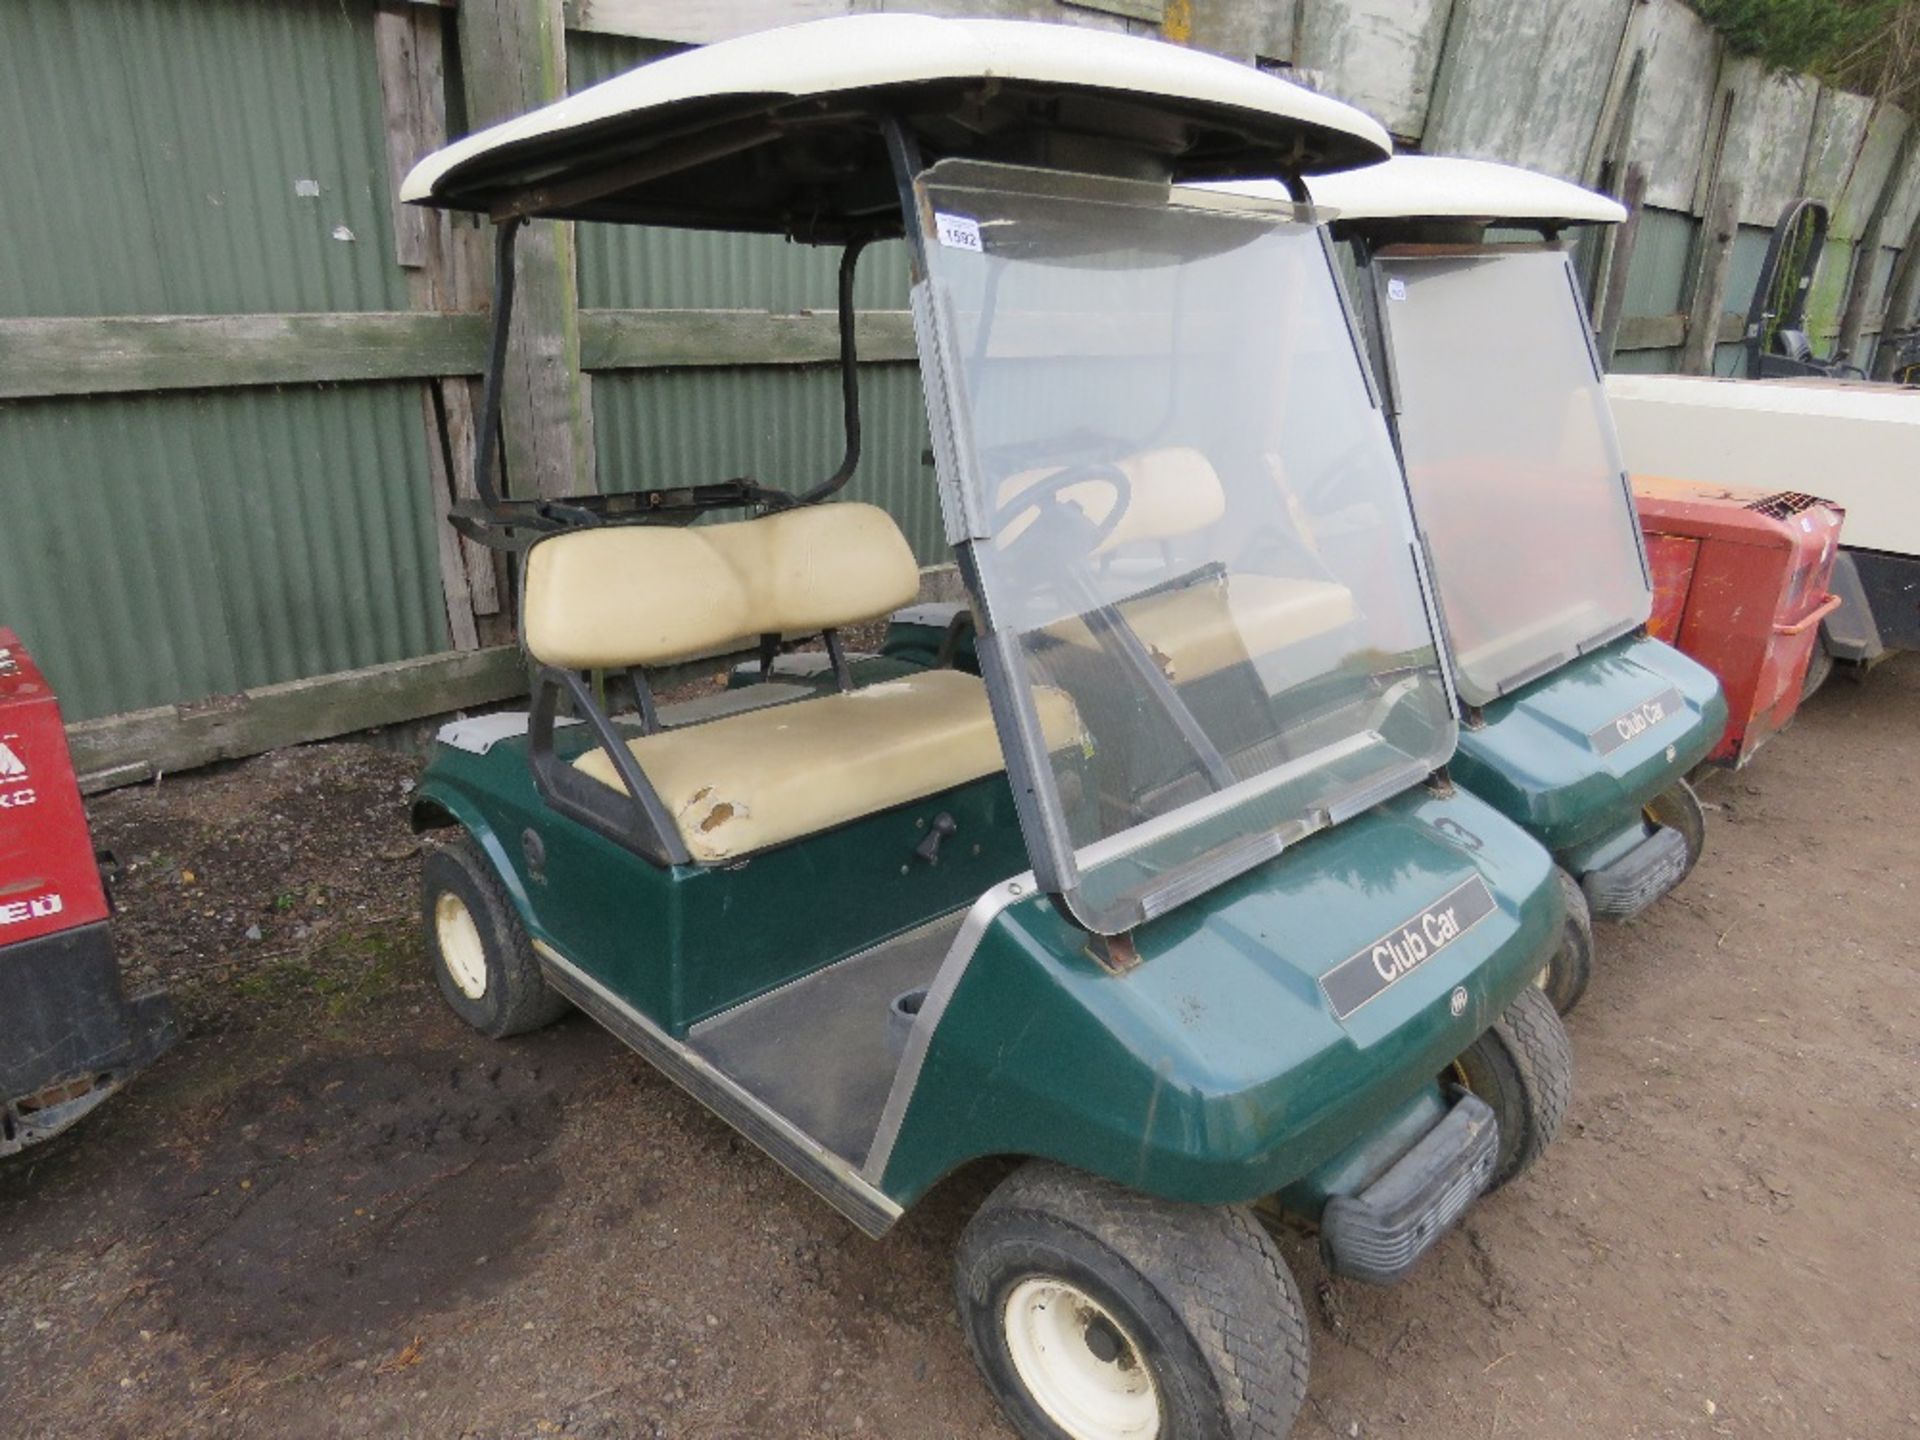 CLUBCAR PETROL ENGINED GOLF CART. BEEN STORED FOR SOME TIME, UNTESTED.